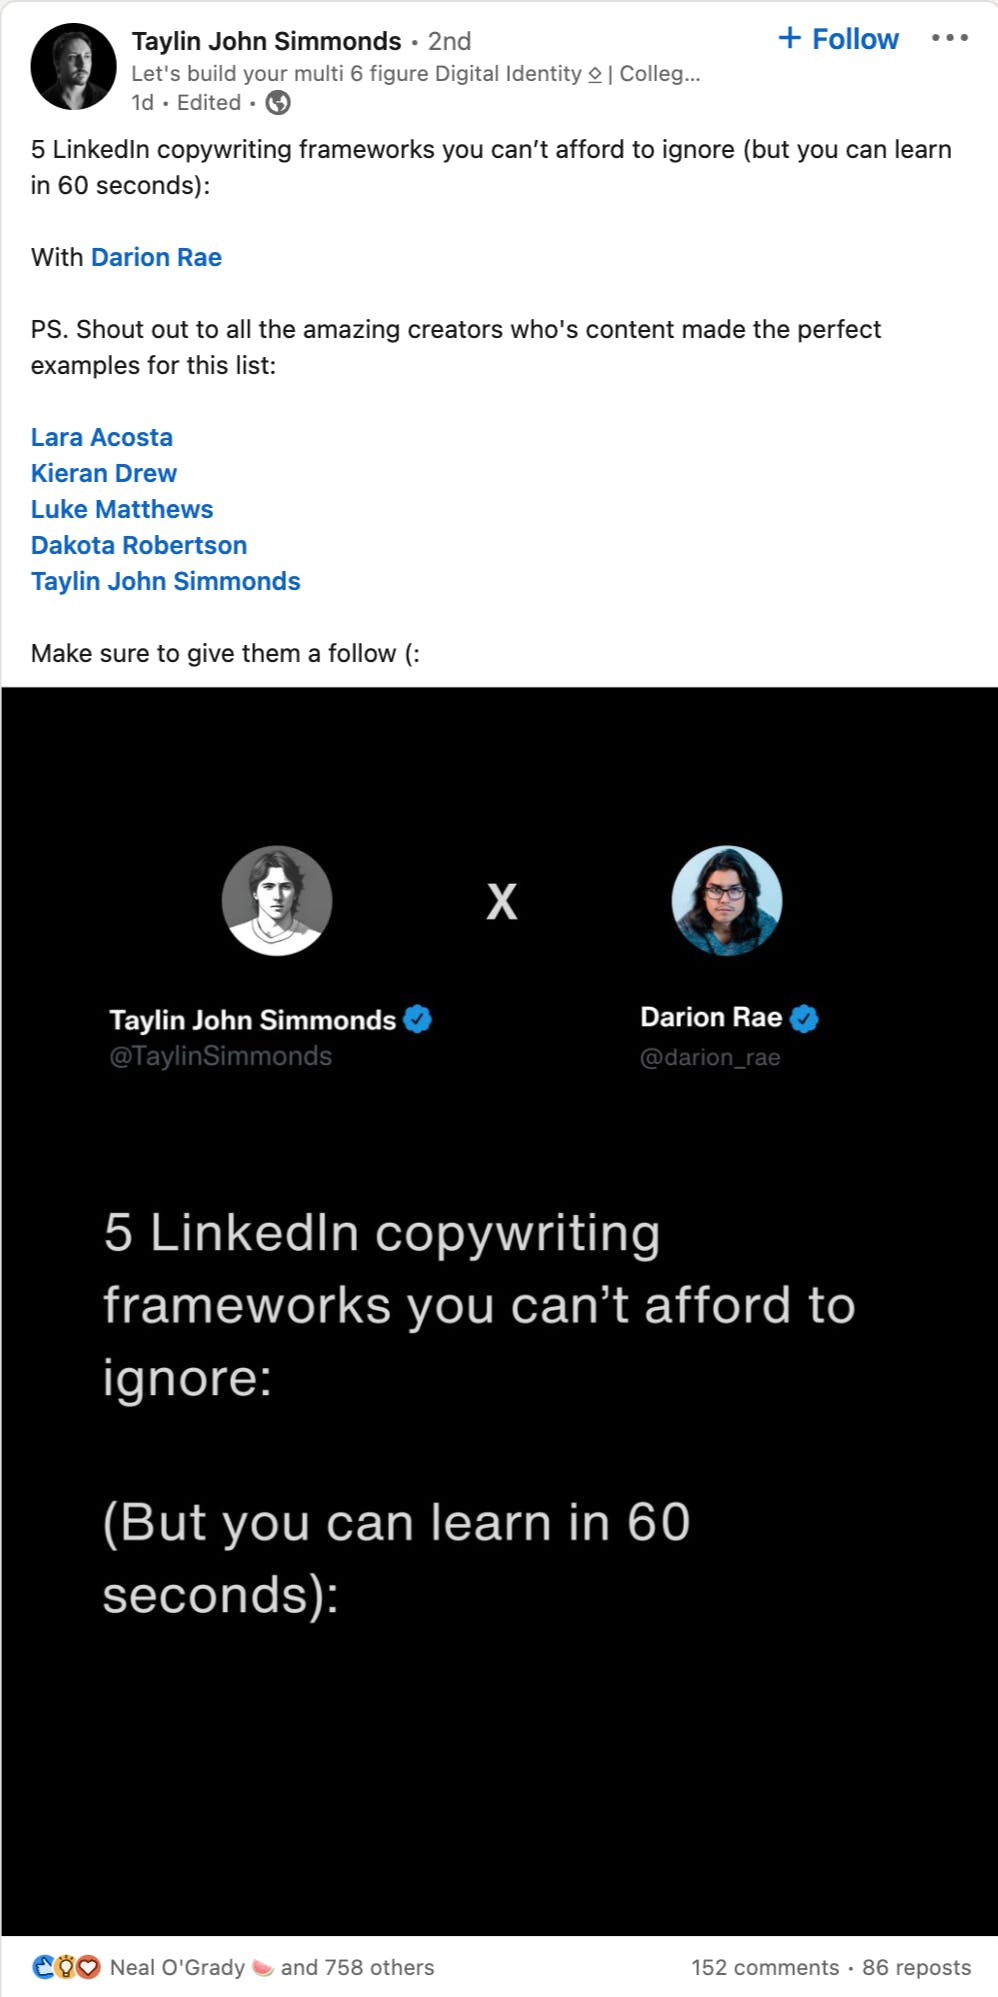 5 LinkedIn copywriting frameworks you can’t afford to ignore (but you can learn in 60 seconds):  With Darion Rae  PS. Shout out to all the amazing creators who's content made the perfect examples for this list: